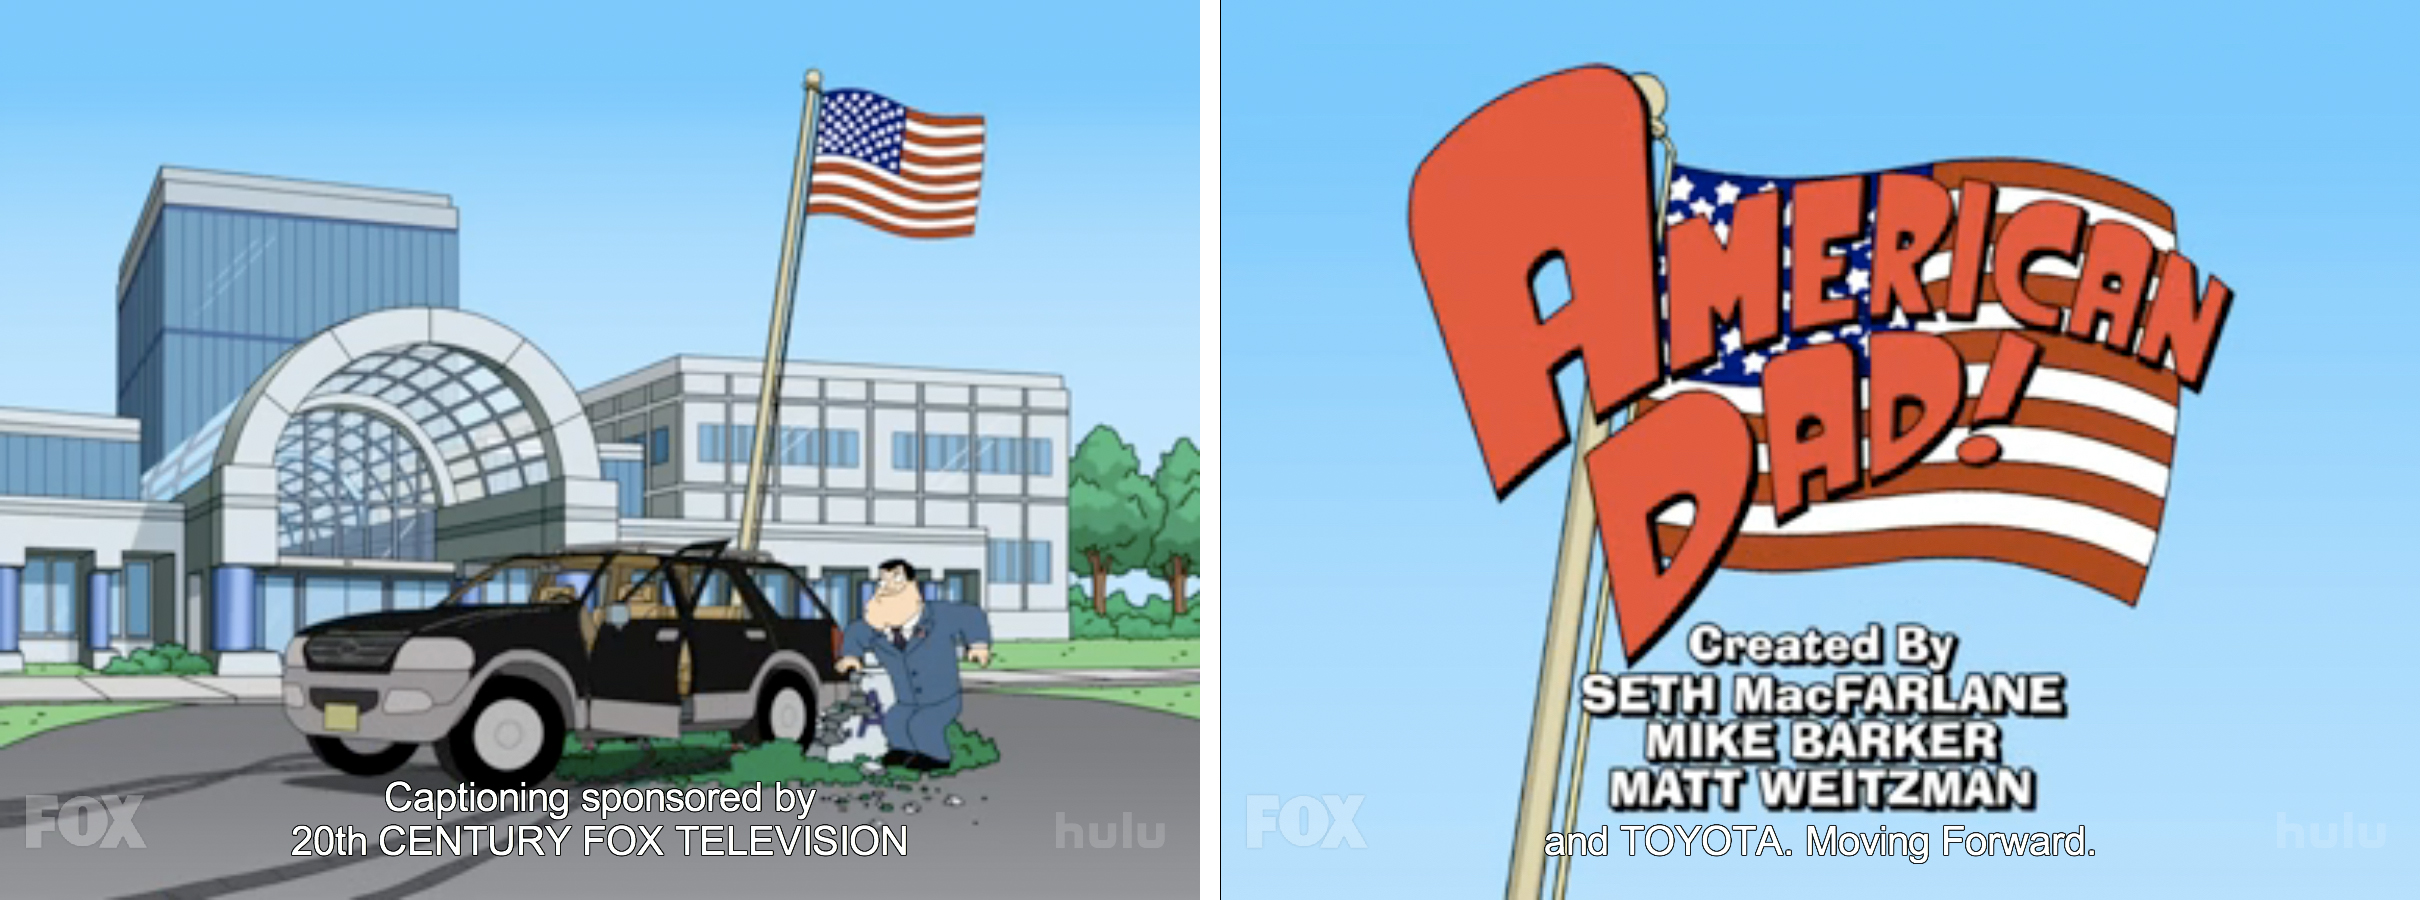 Two screen shots from the opening to American Dad featuring the sponsor's messages in the caption track